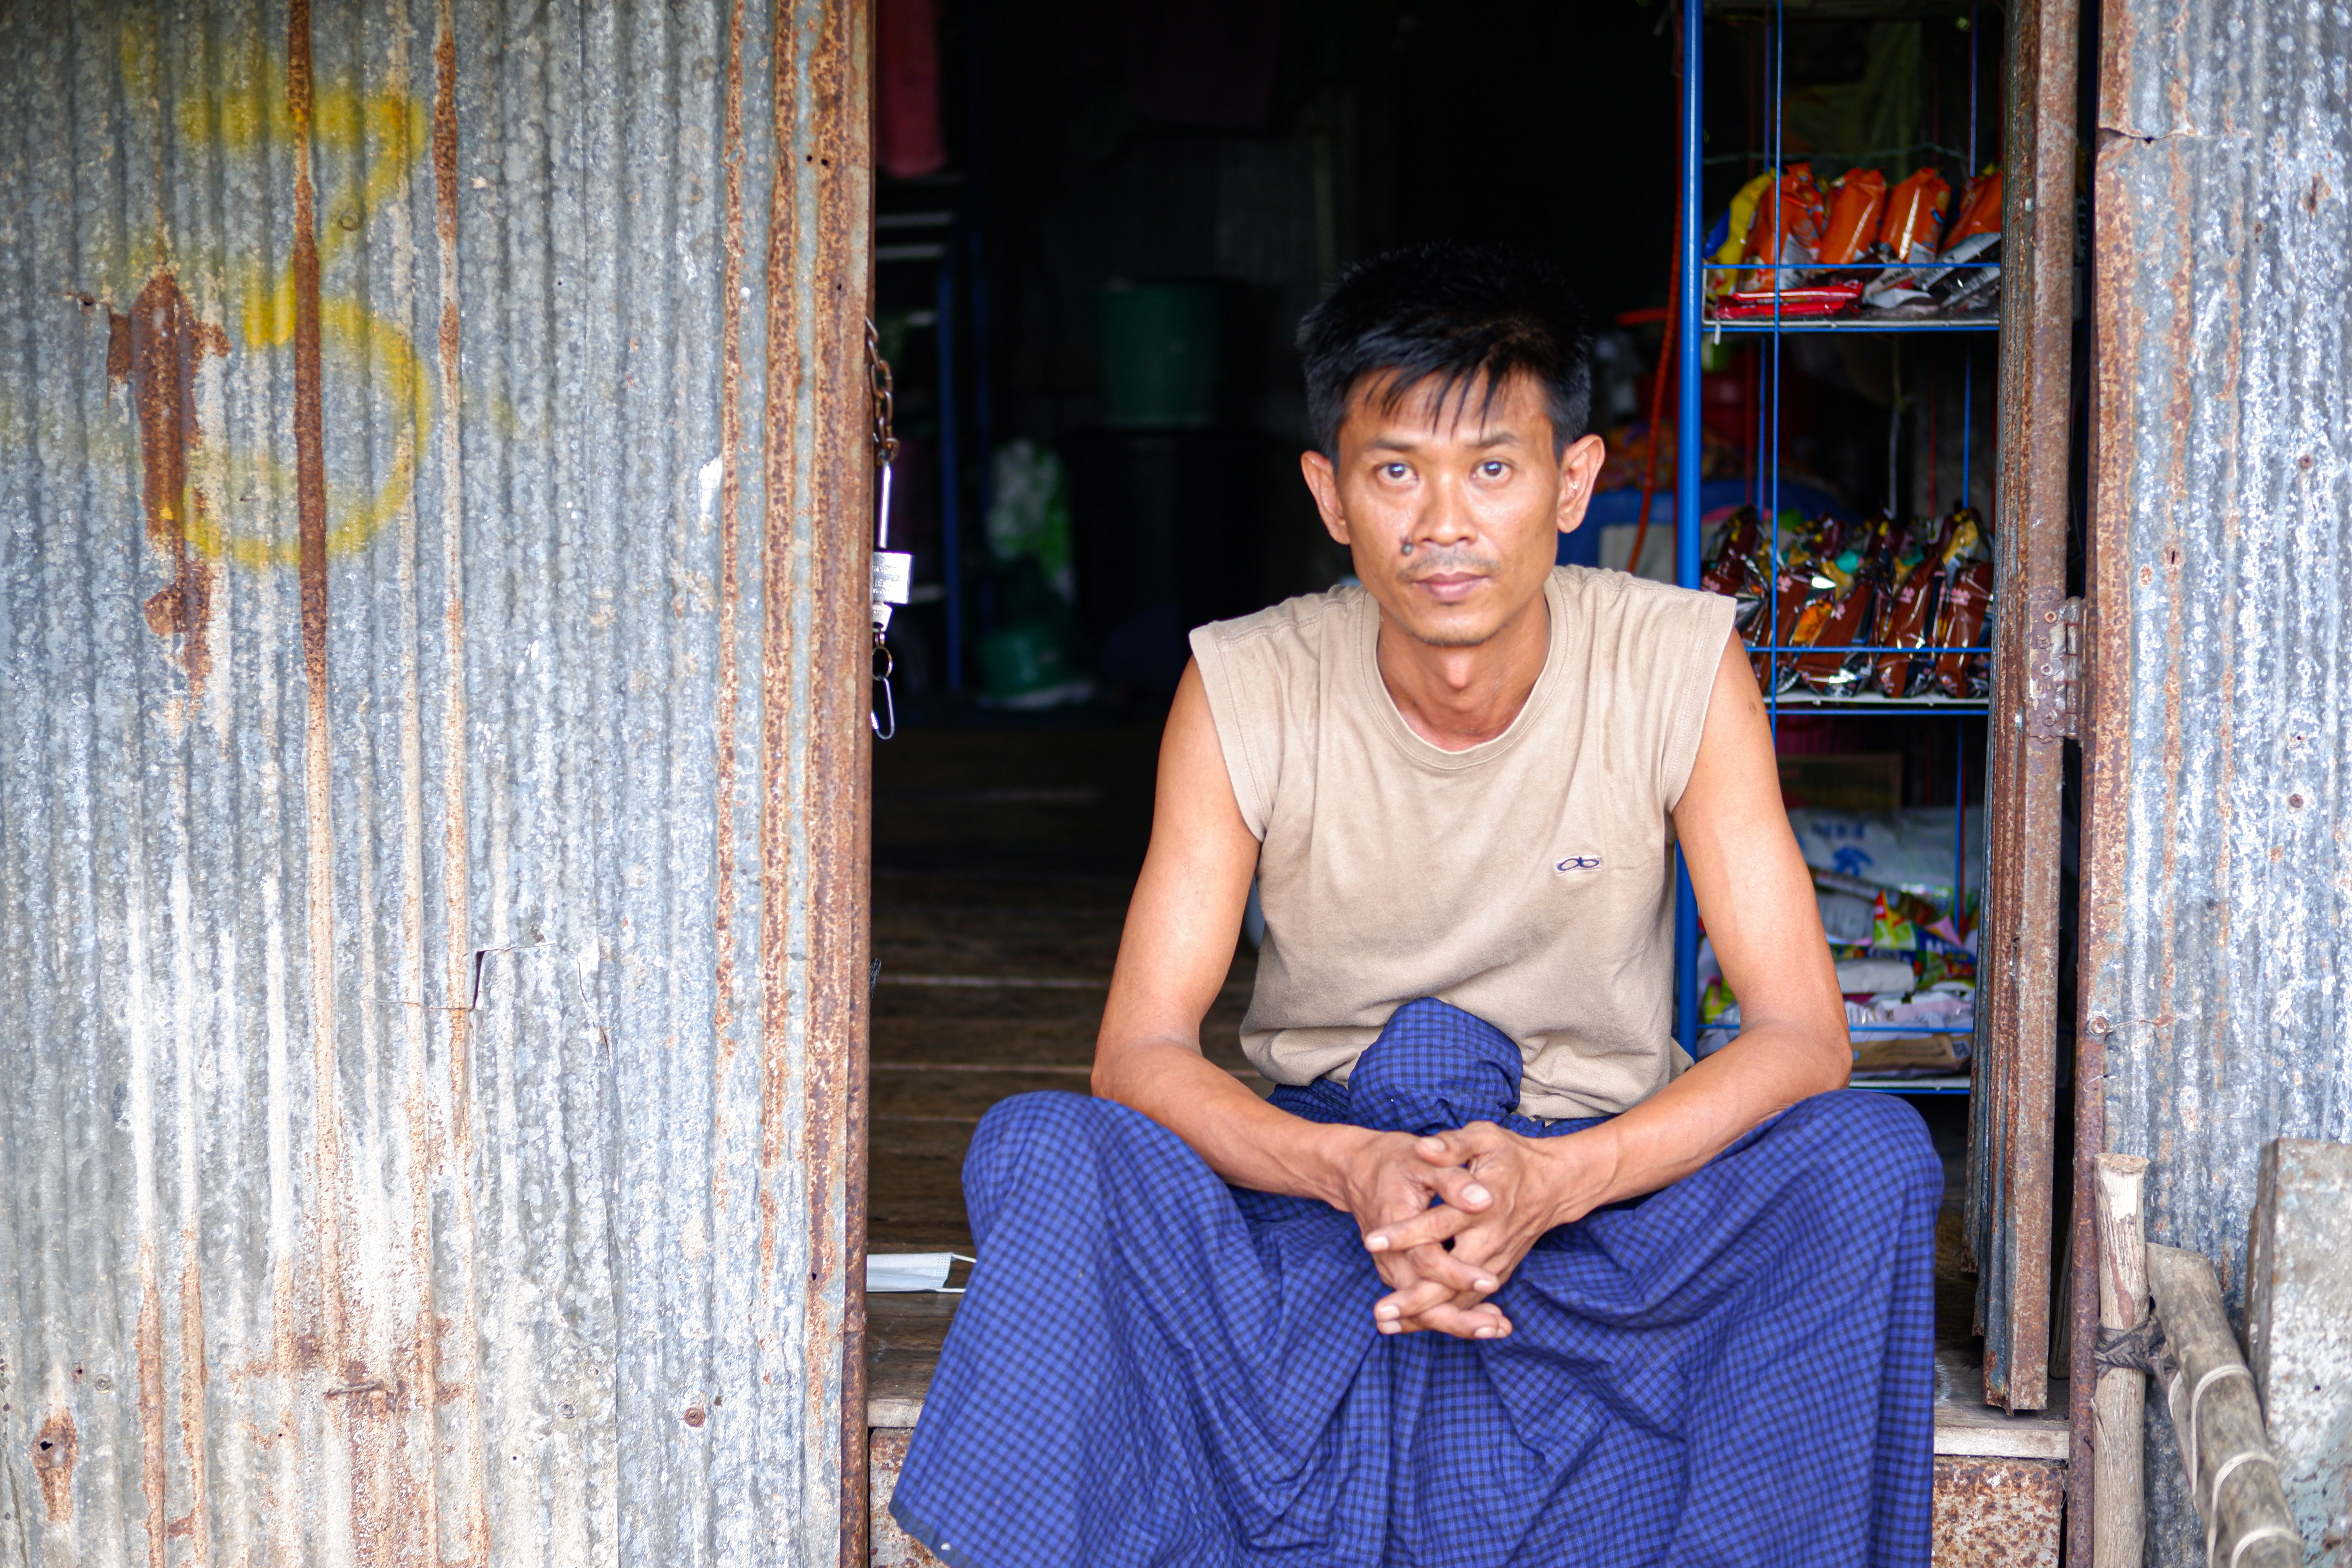 Ko Aye migrated from Myanmar to Thailand shortly before the COVID-19 pandemic struck. Photo: IOM/Miko Alazas